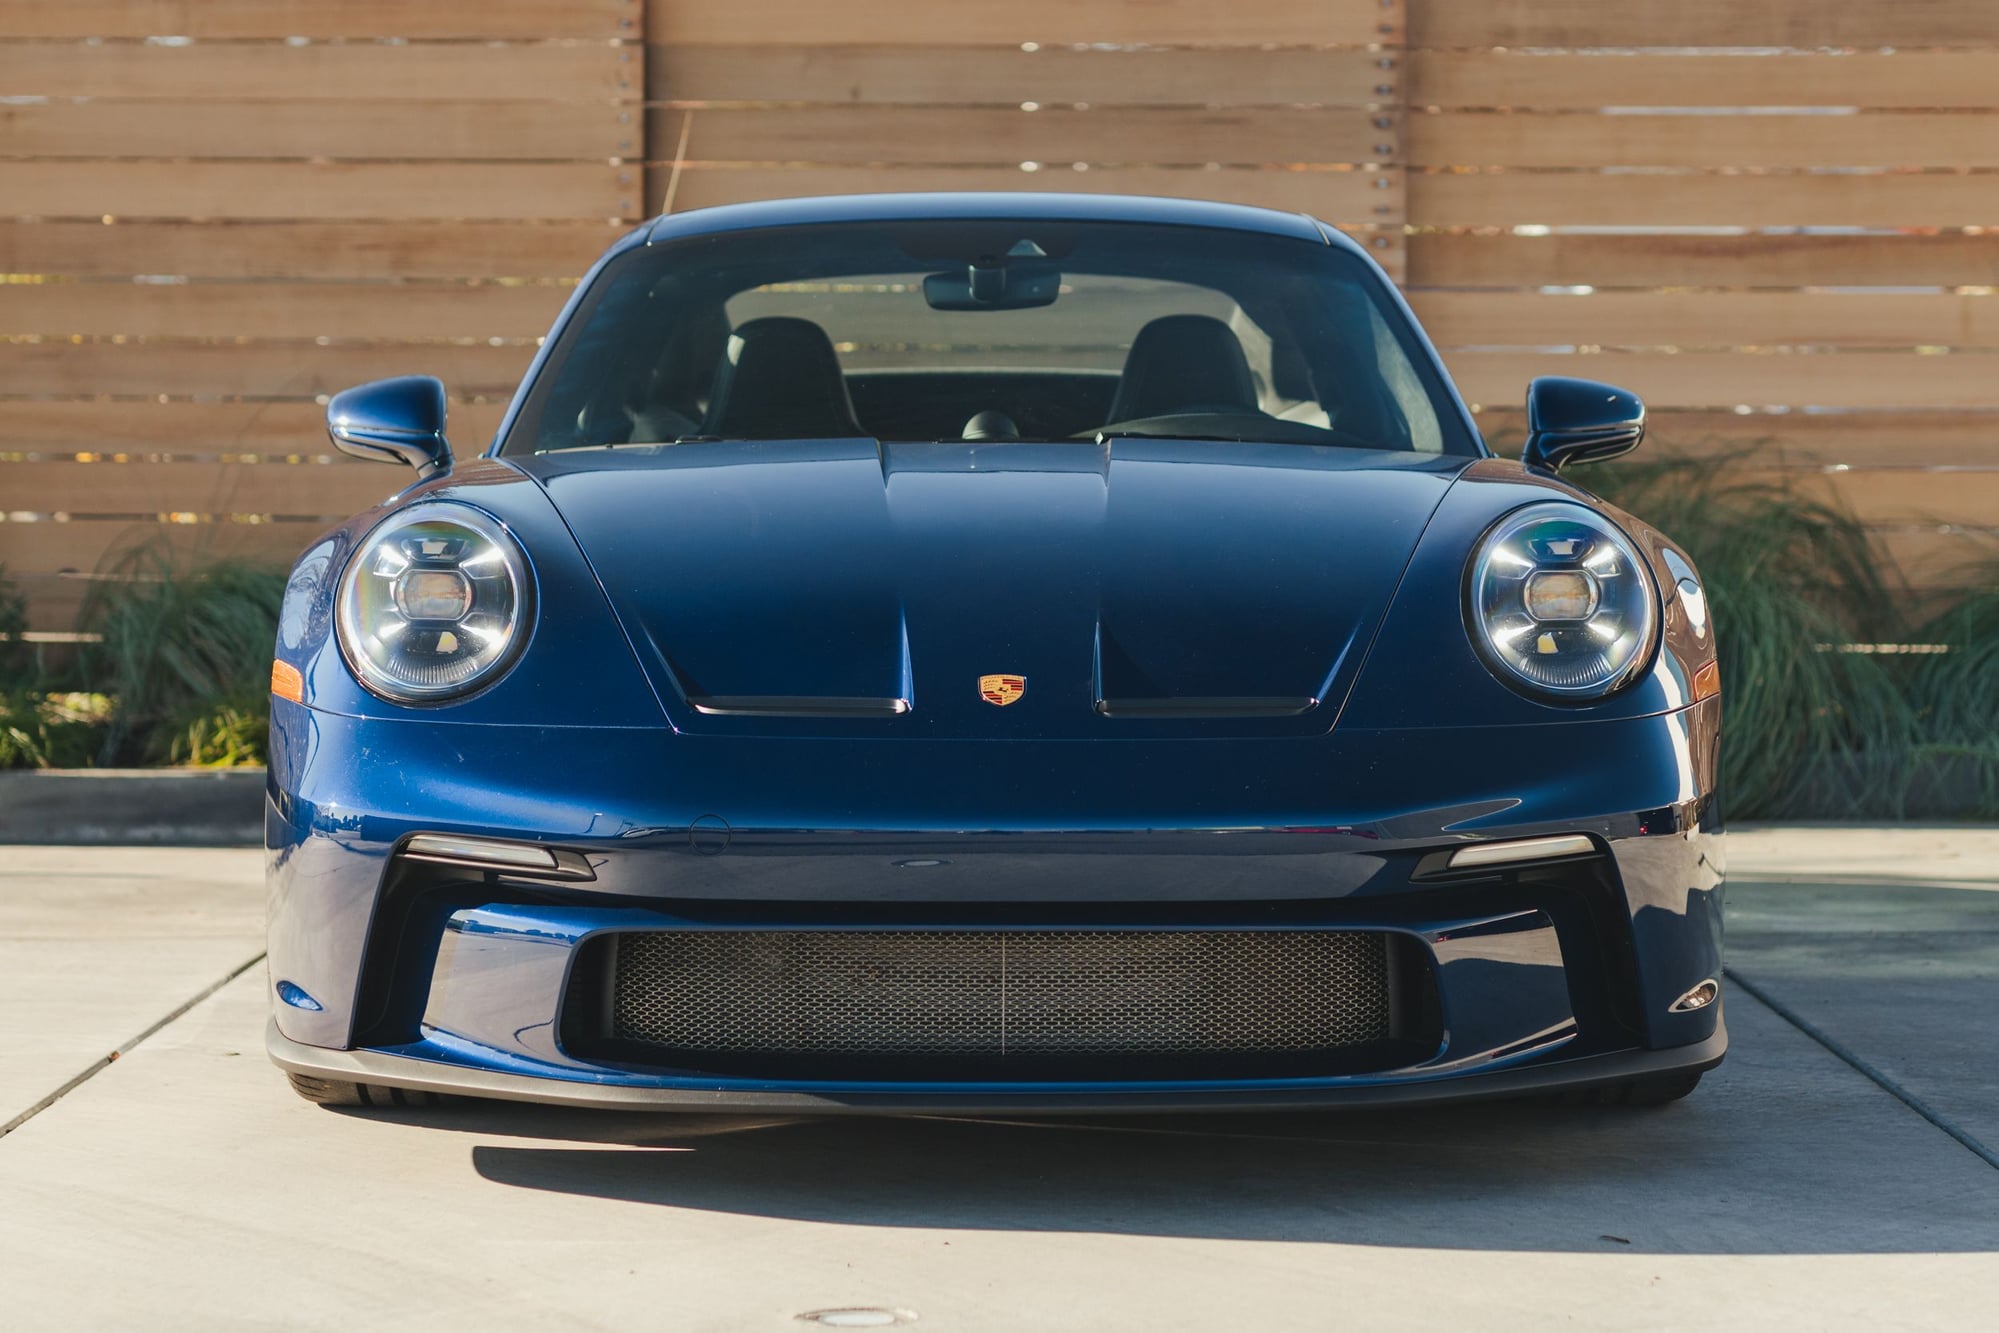 2022 Porsche 911 - 2022 992 GT3 Touring in Gentian Blue Metallic with 4,407 Miles. - Used - VIN WP0AC2A90NS270443 - 4,407 Miles - 6 cyl - 2WD - Automatic - Coupe - Blue - San Carlos, CA 94070, United States